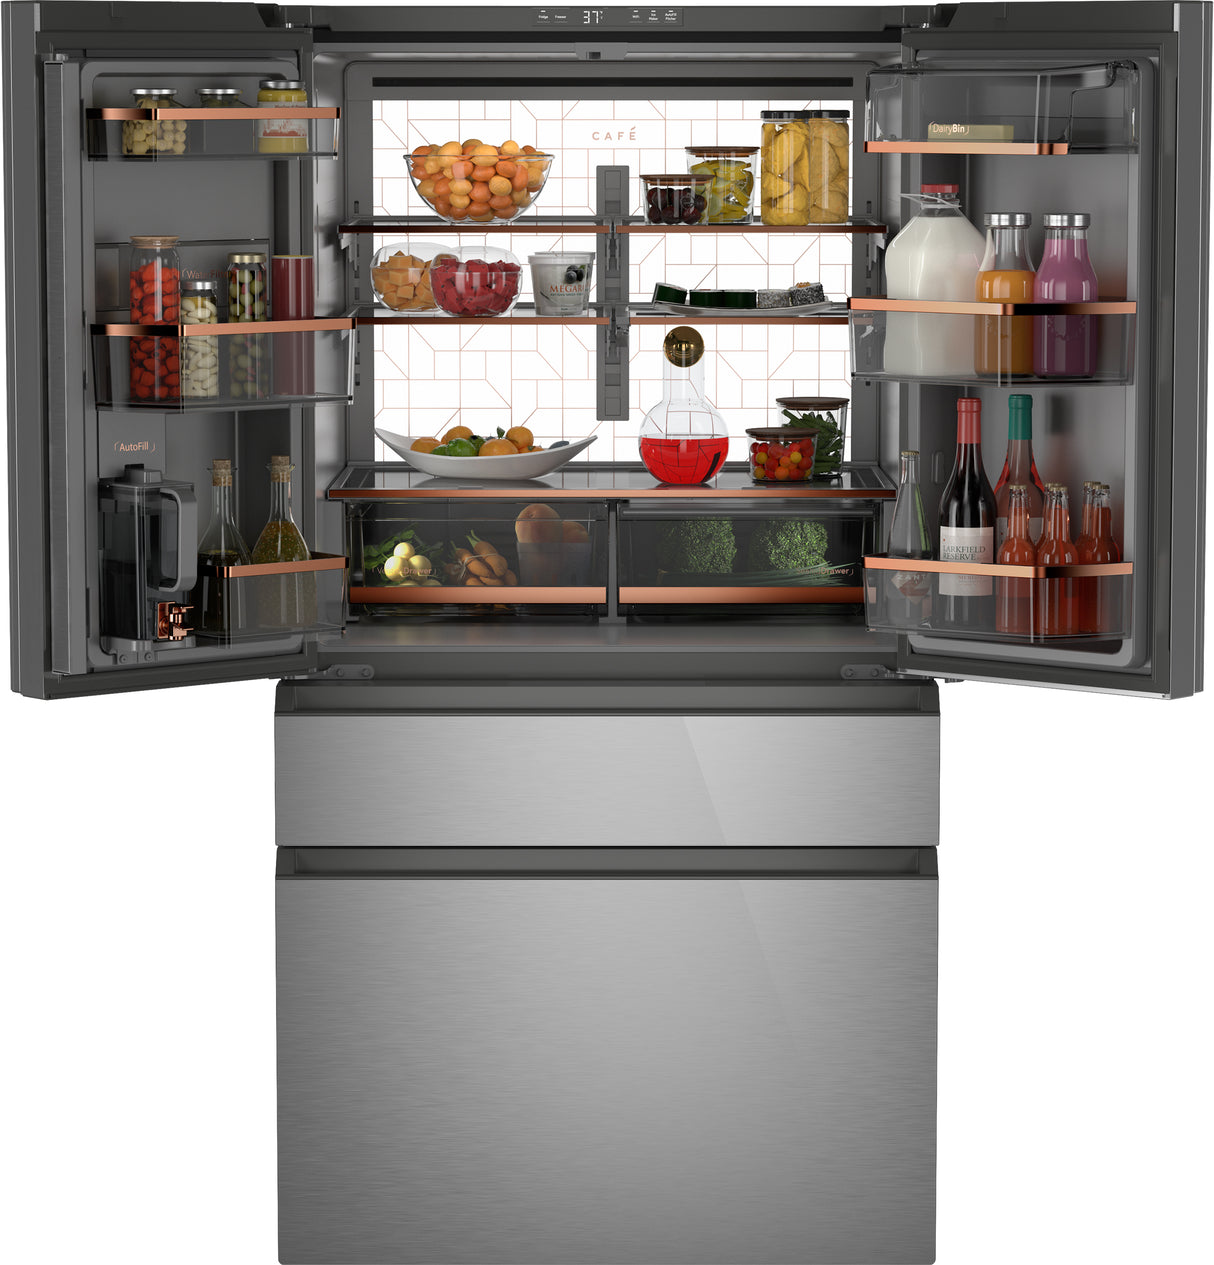 Caf(eback)(TM) ENERGY STAR(R) 28.7 Cu. Ft. Smart 4-Door French-Door Refrigerator in Platinum Glass With Dual-Dispense AutoFill Pitcher - (CGE29DM5TS5)